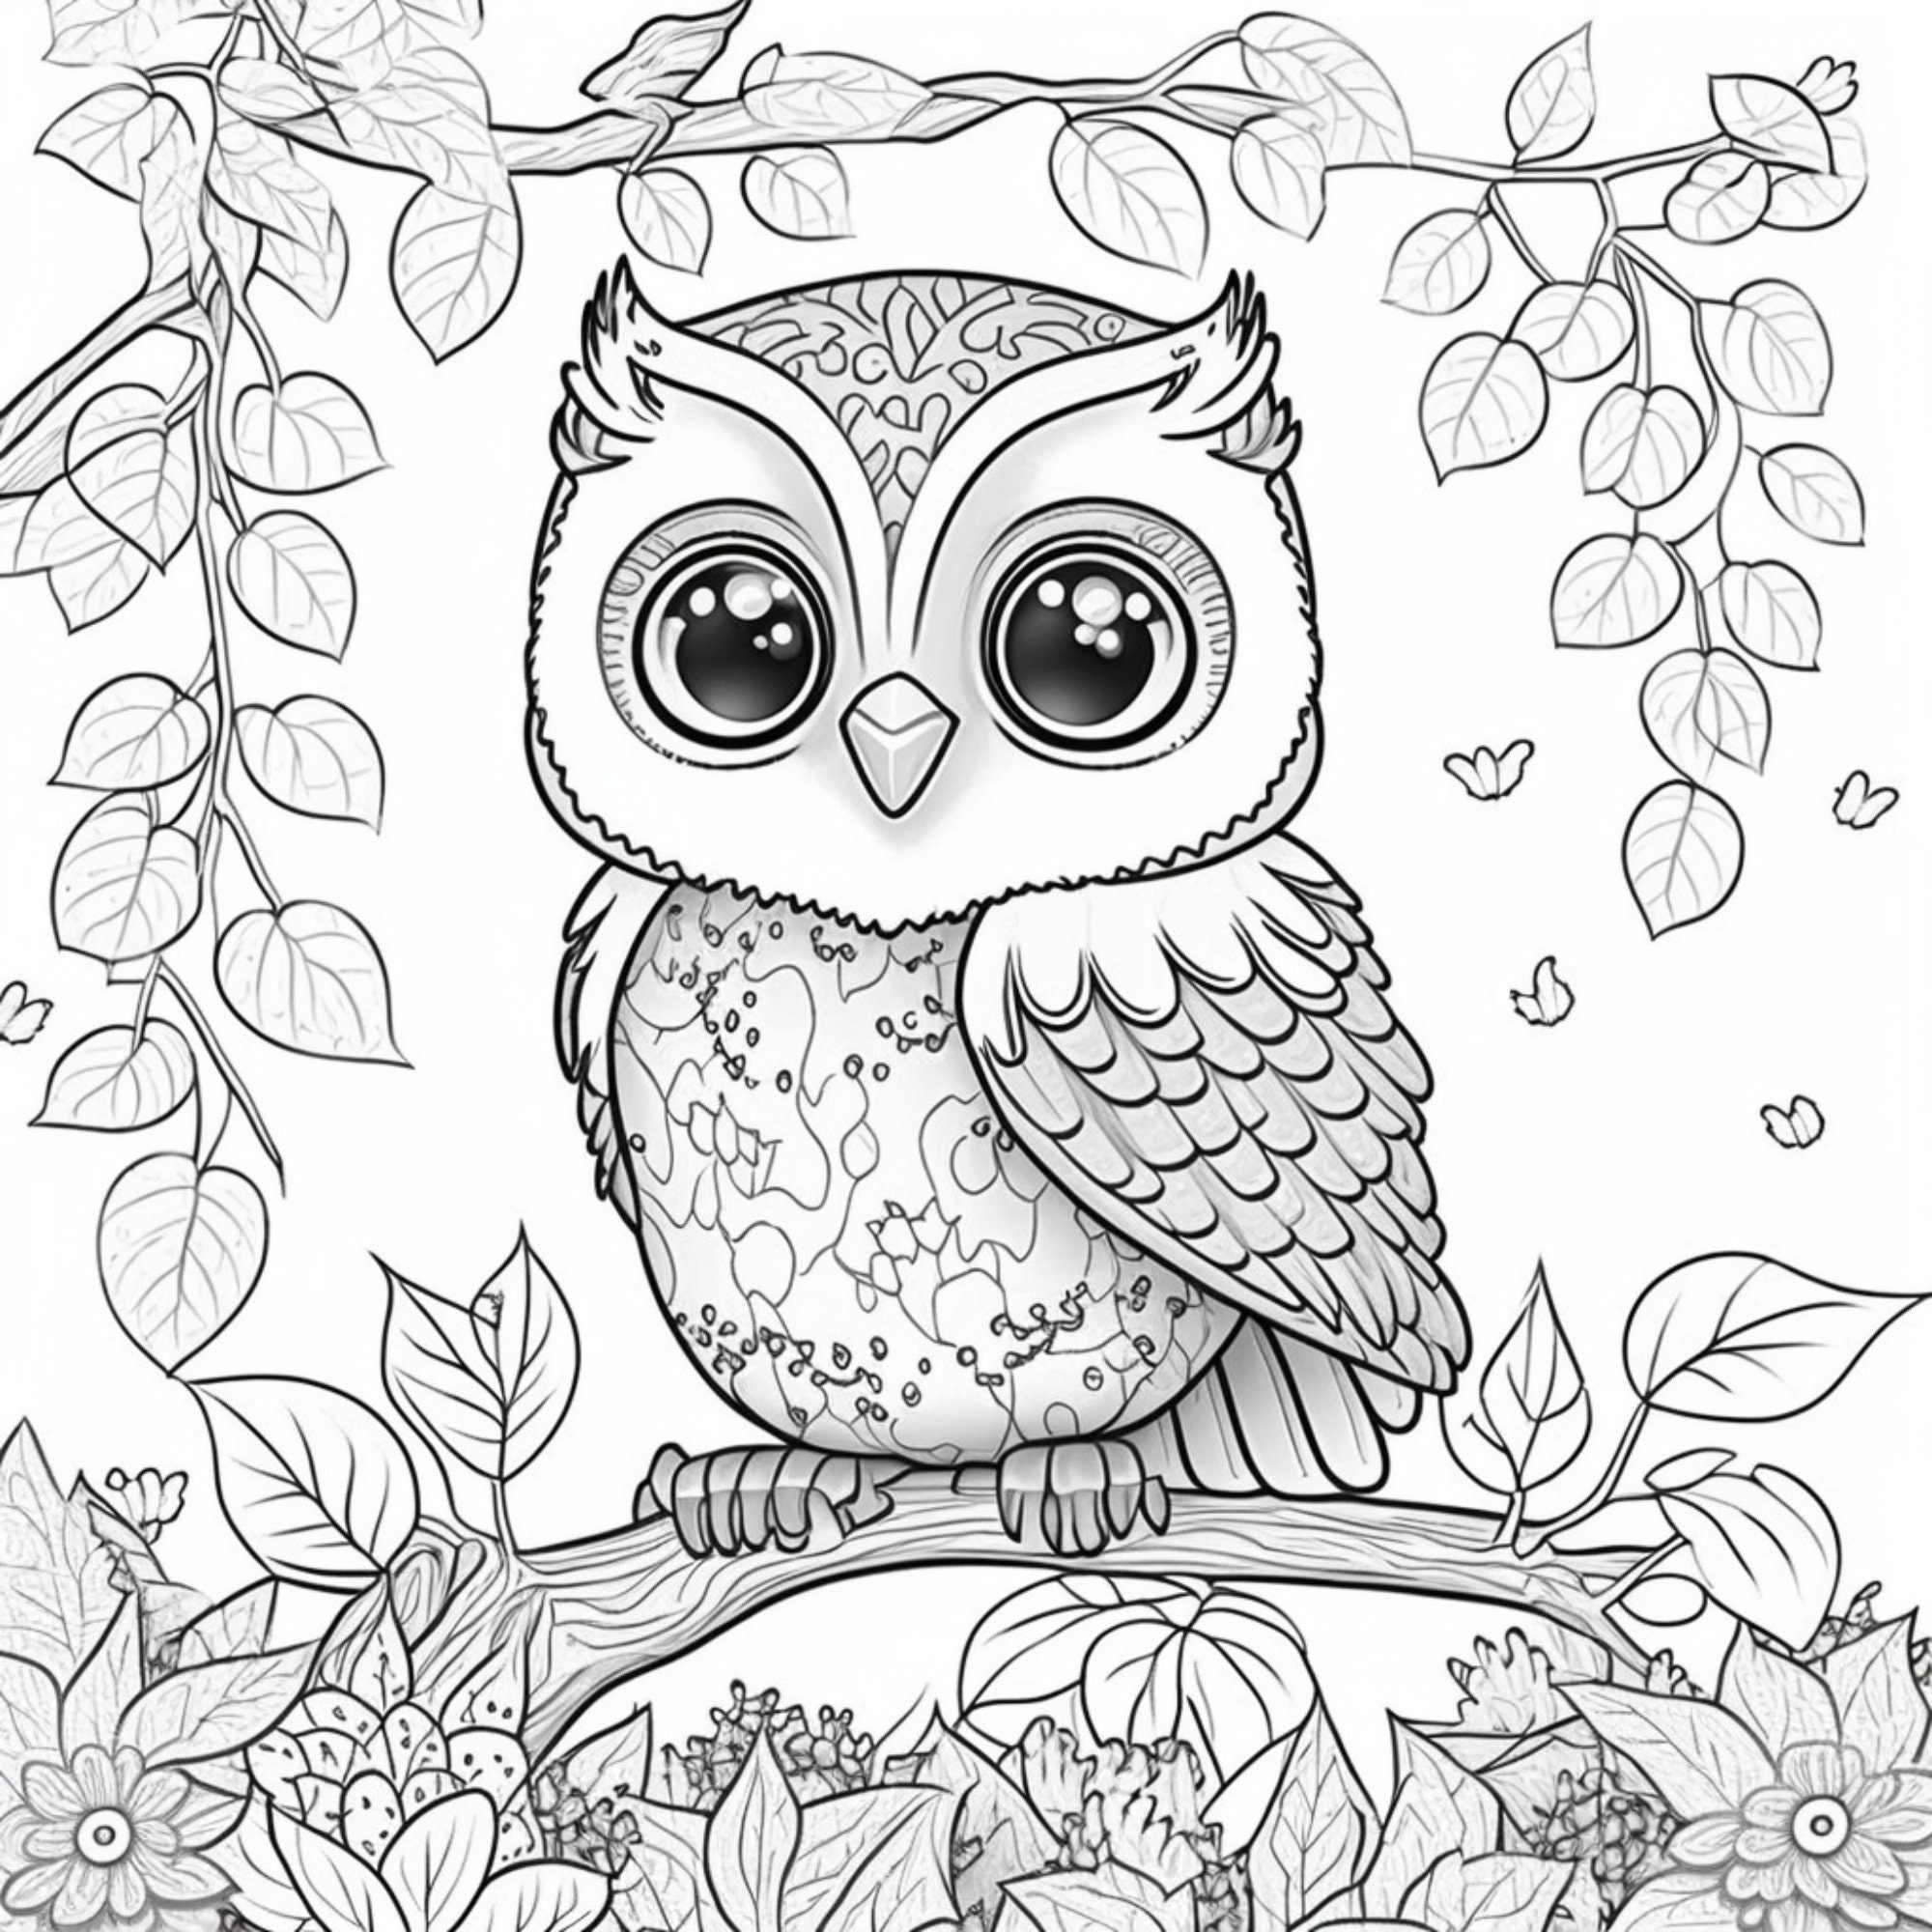 Otter Coloring Book for Adults: Stress-Relief Coloring Book for Grown-ups, Containing 40 Paisley, Henna and Mandala Style Otter Coloring Pages [Book]